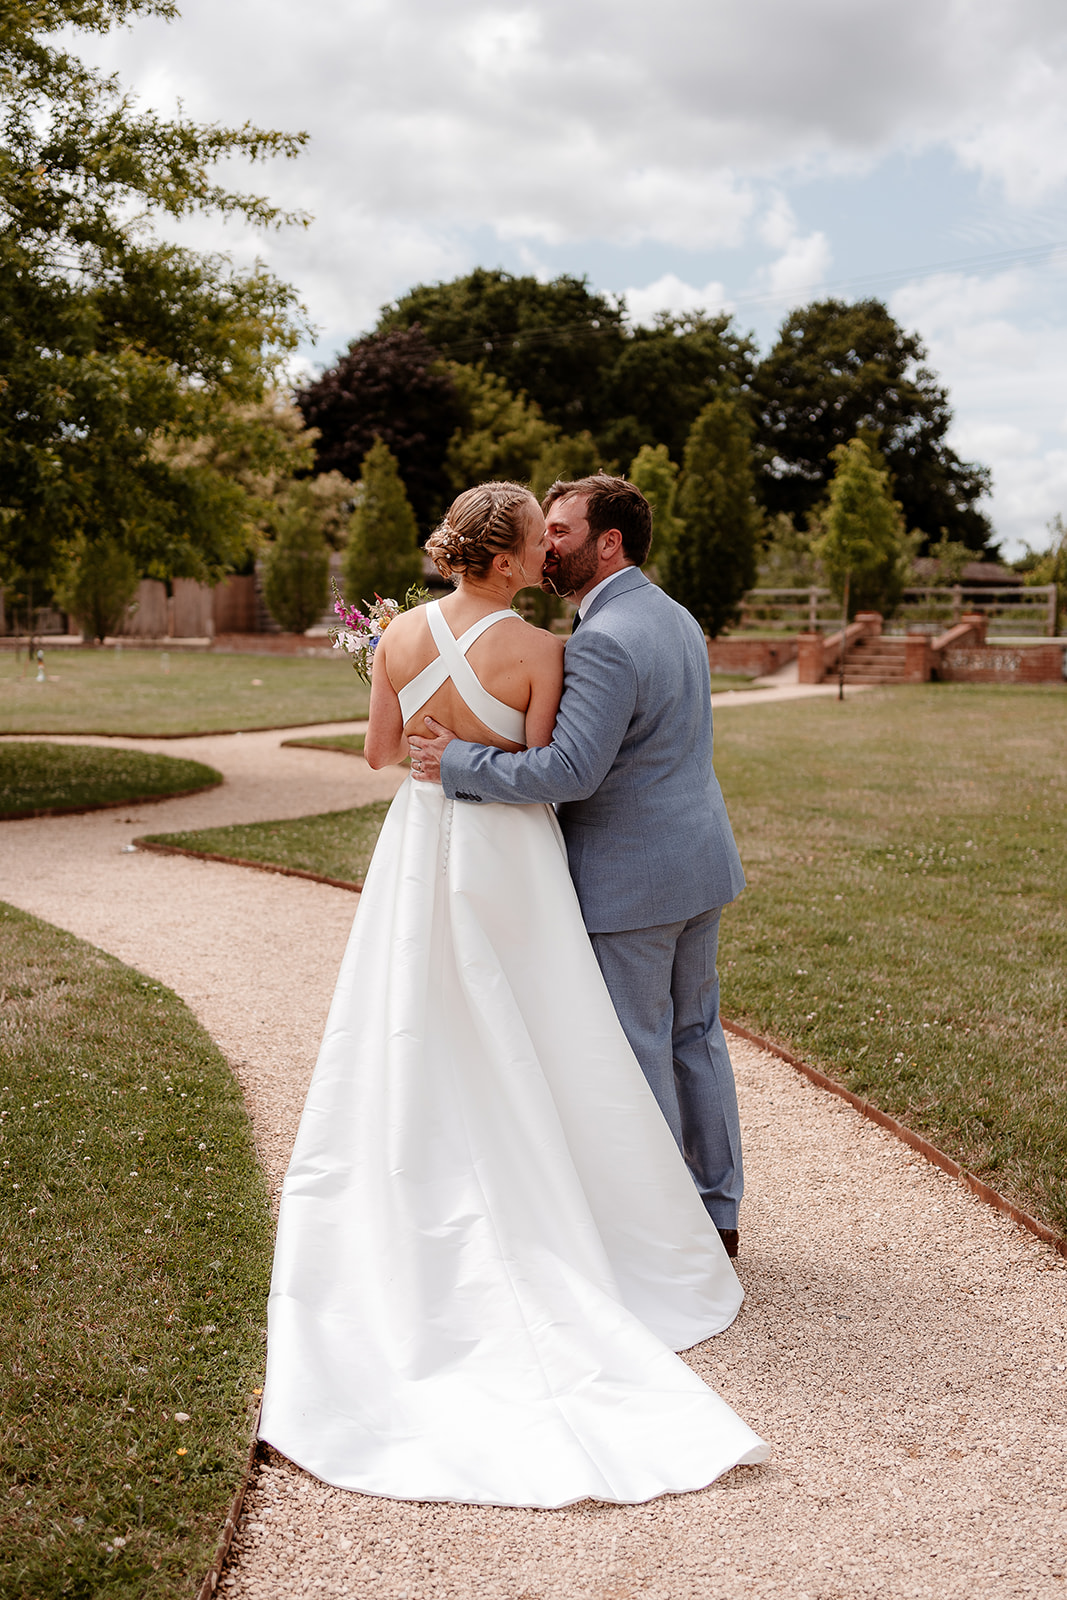 Bride and groom stop to share a kiss after their outdoor wedding ceremony at Silchester Farm